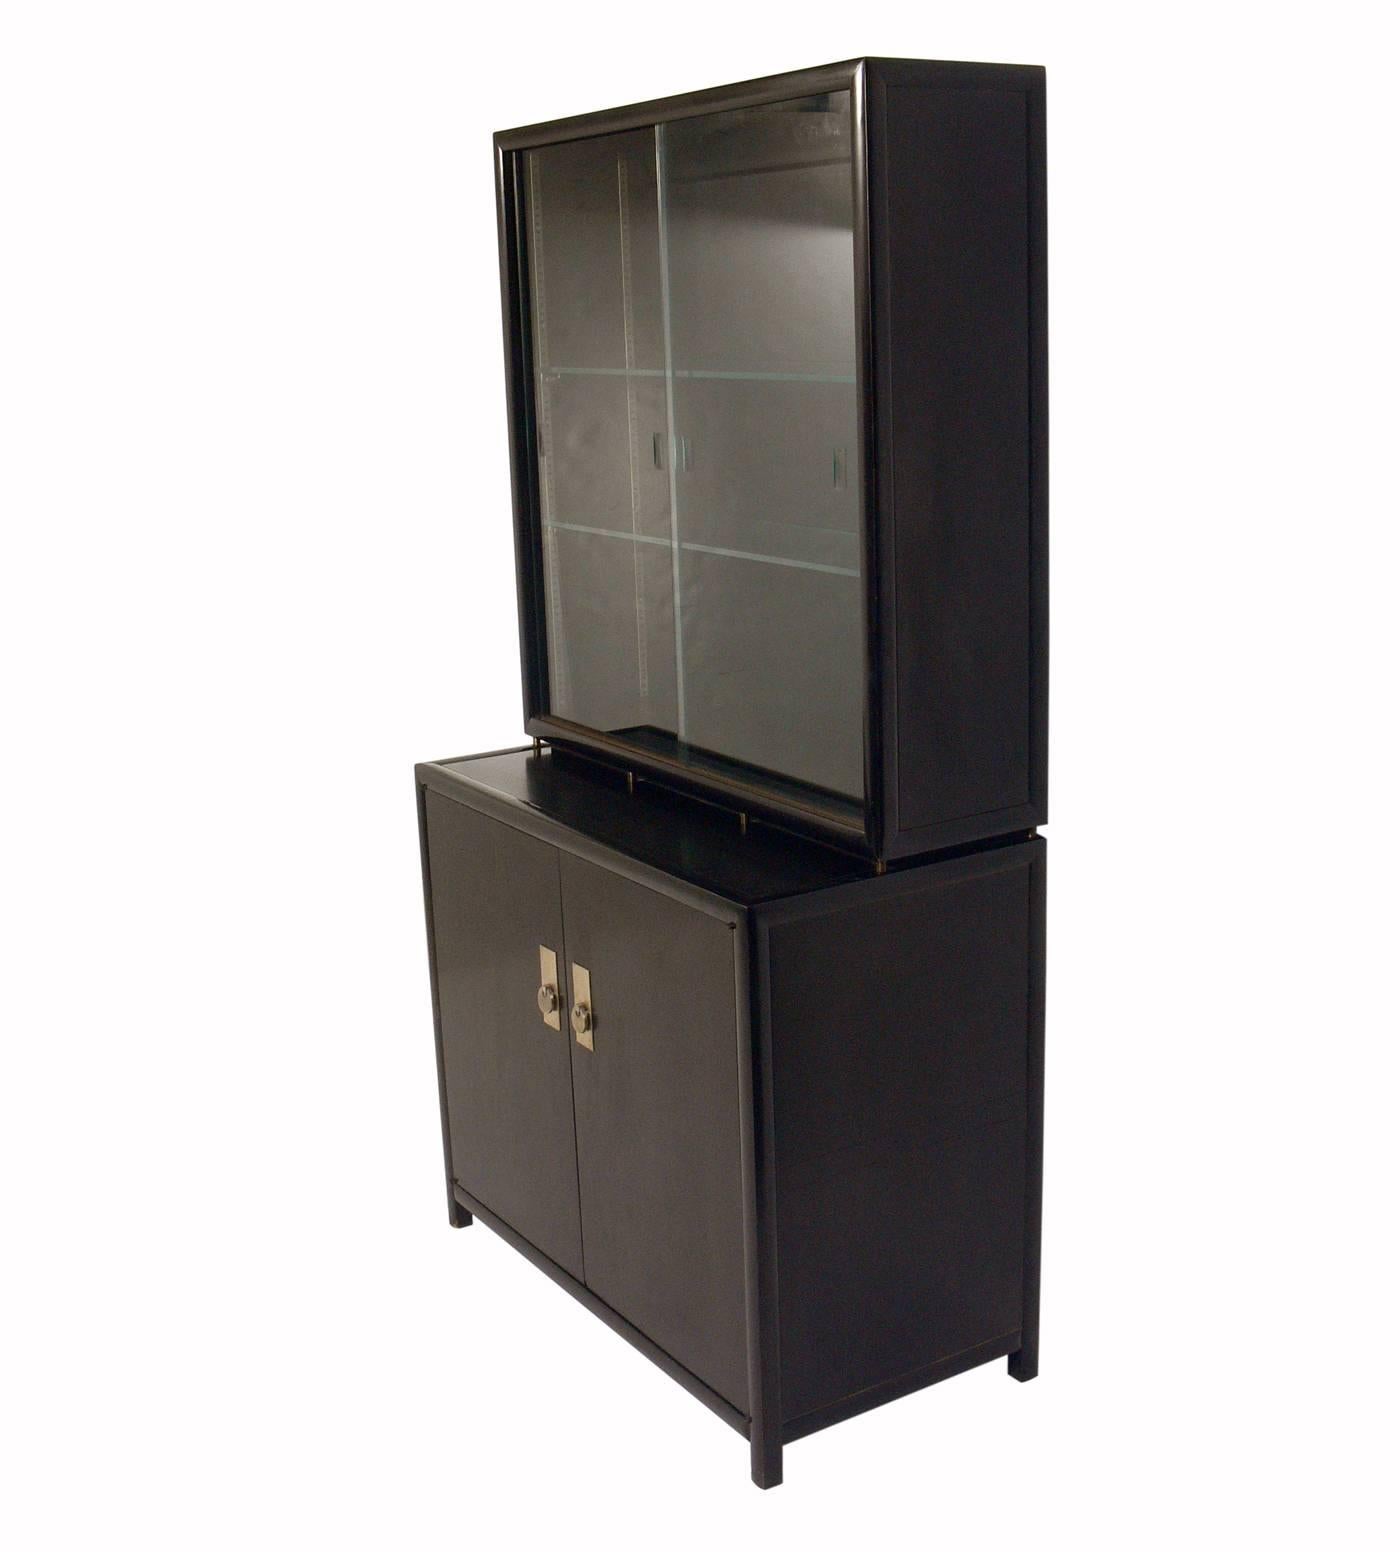 Clean lined bar cabinet or vitrine, designed by Michael Taylor for Baker, American, circa 1960s. Subtle Asian influenced design. This piece is a versatile size and can be used as a bar cabinet, vitrine, or bookshelf in a living area, or as a dresser